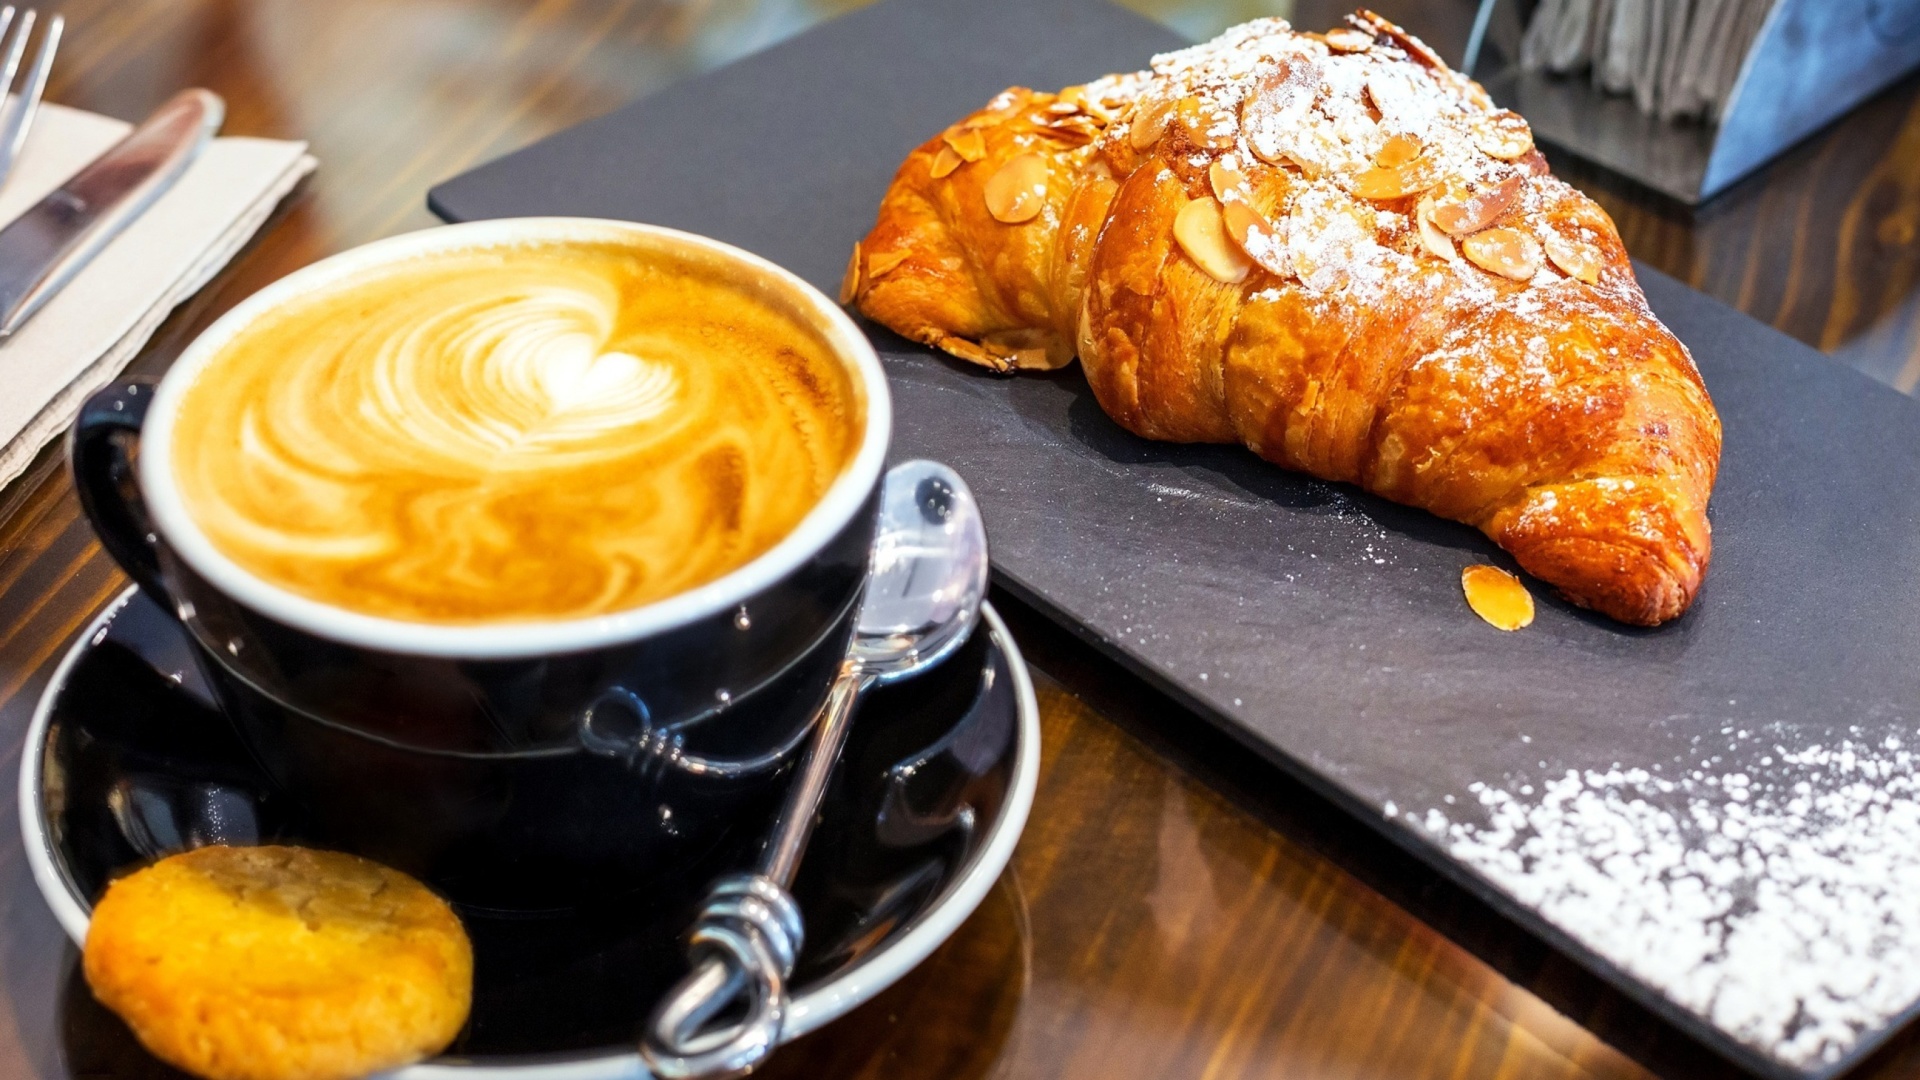 Croissant and cappuccino wallpaper 1920x1080